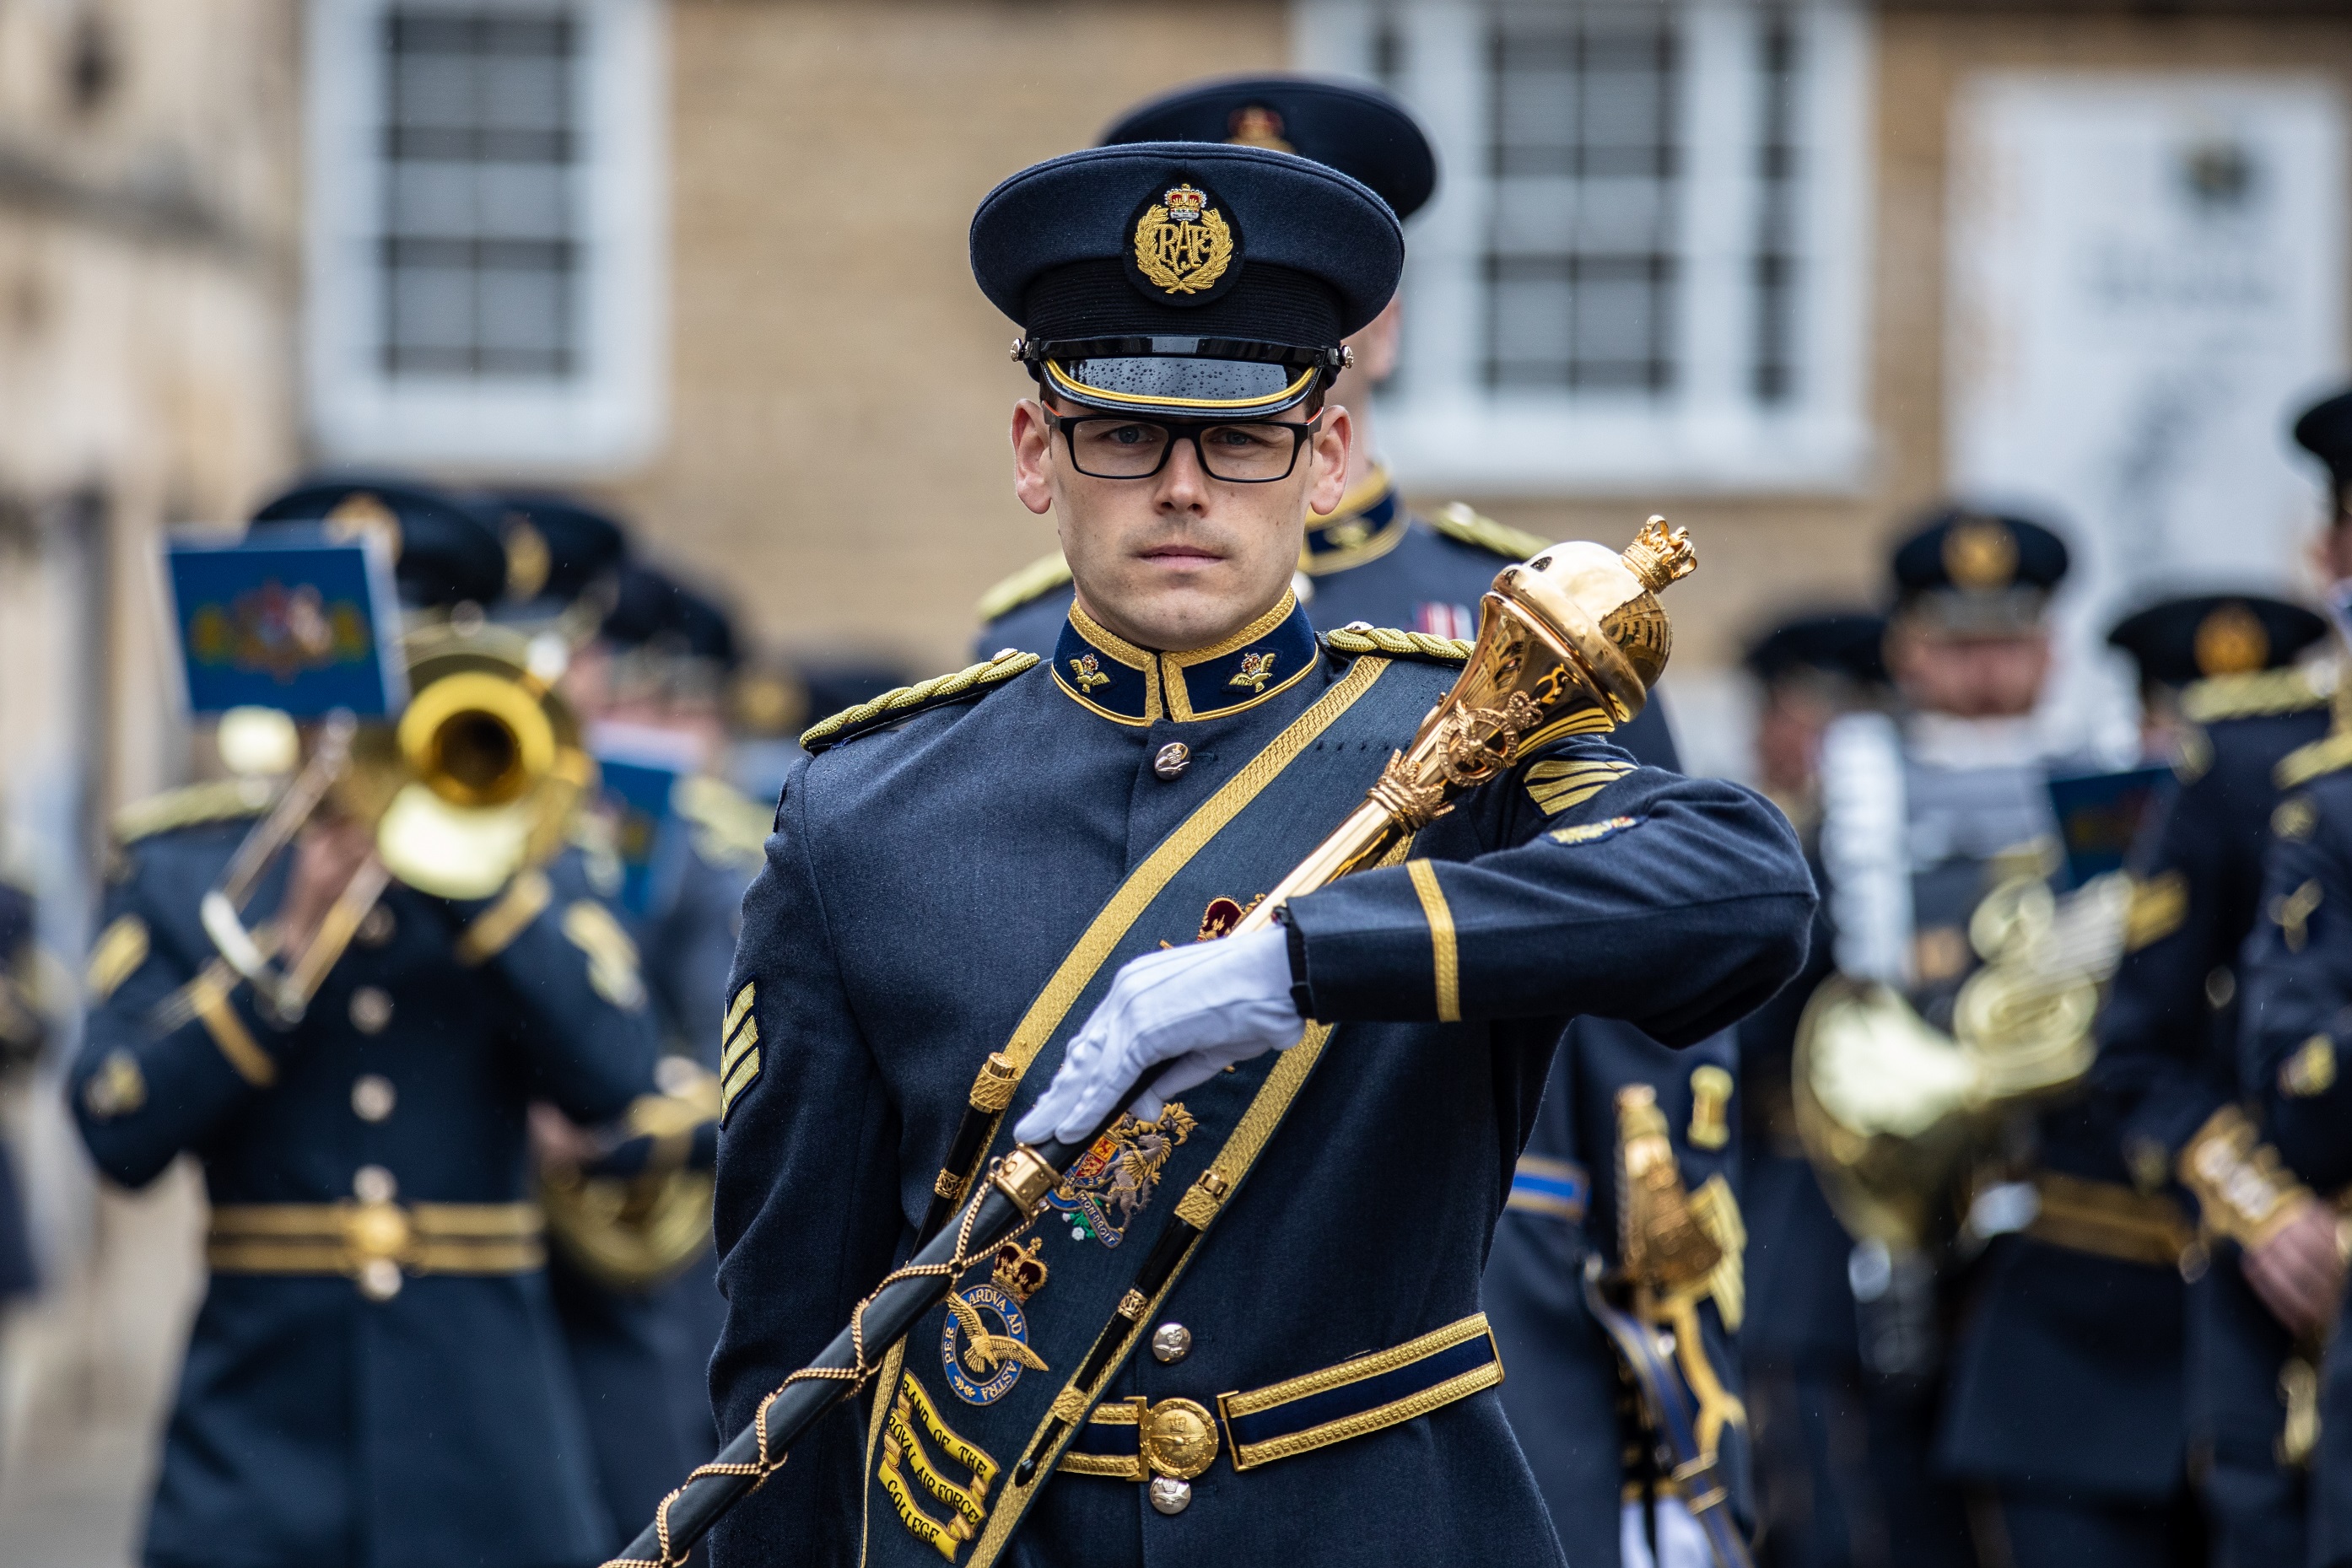 The Band of the Royal Air Force College Cranwell